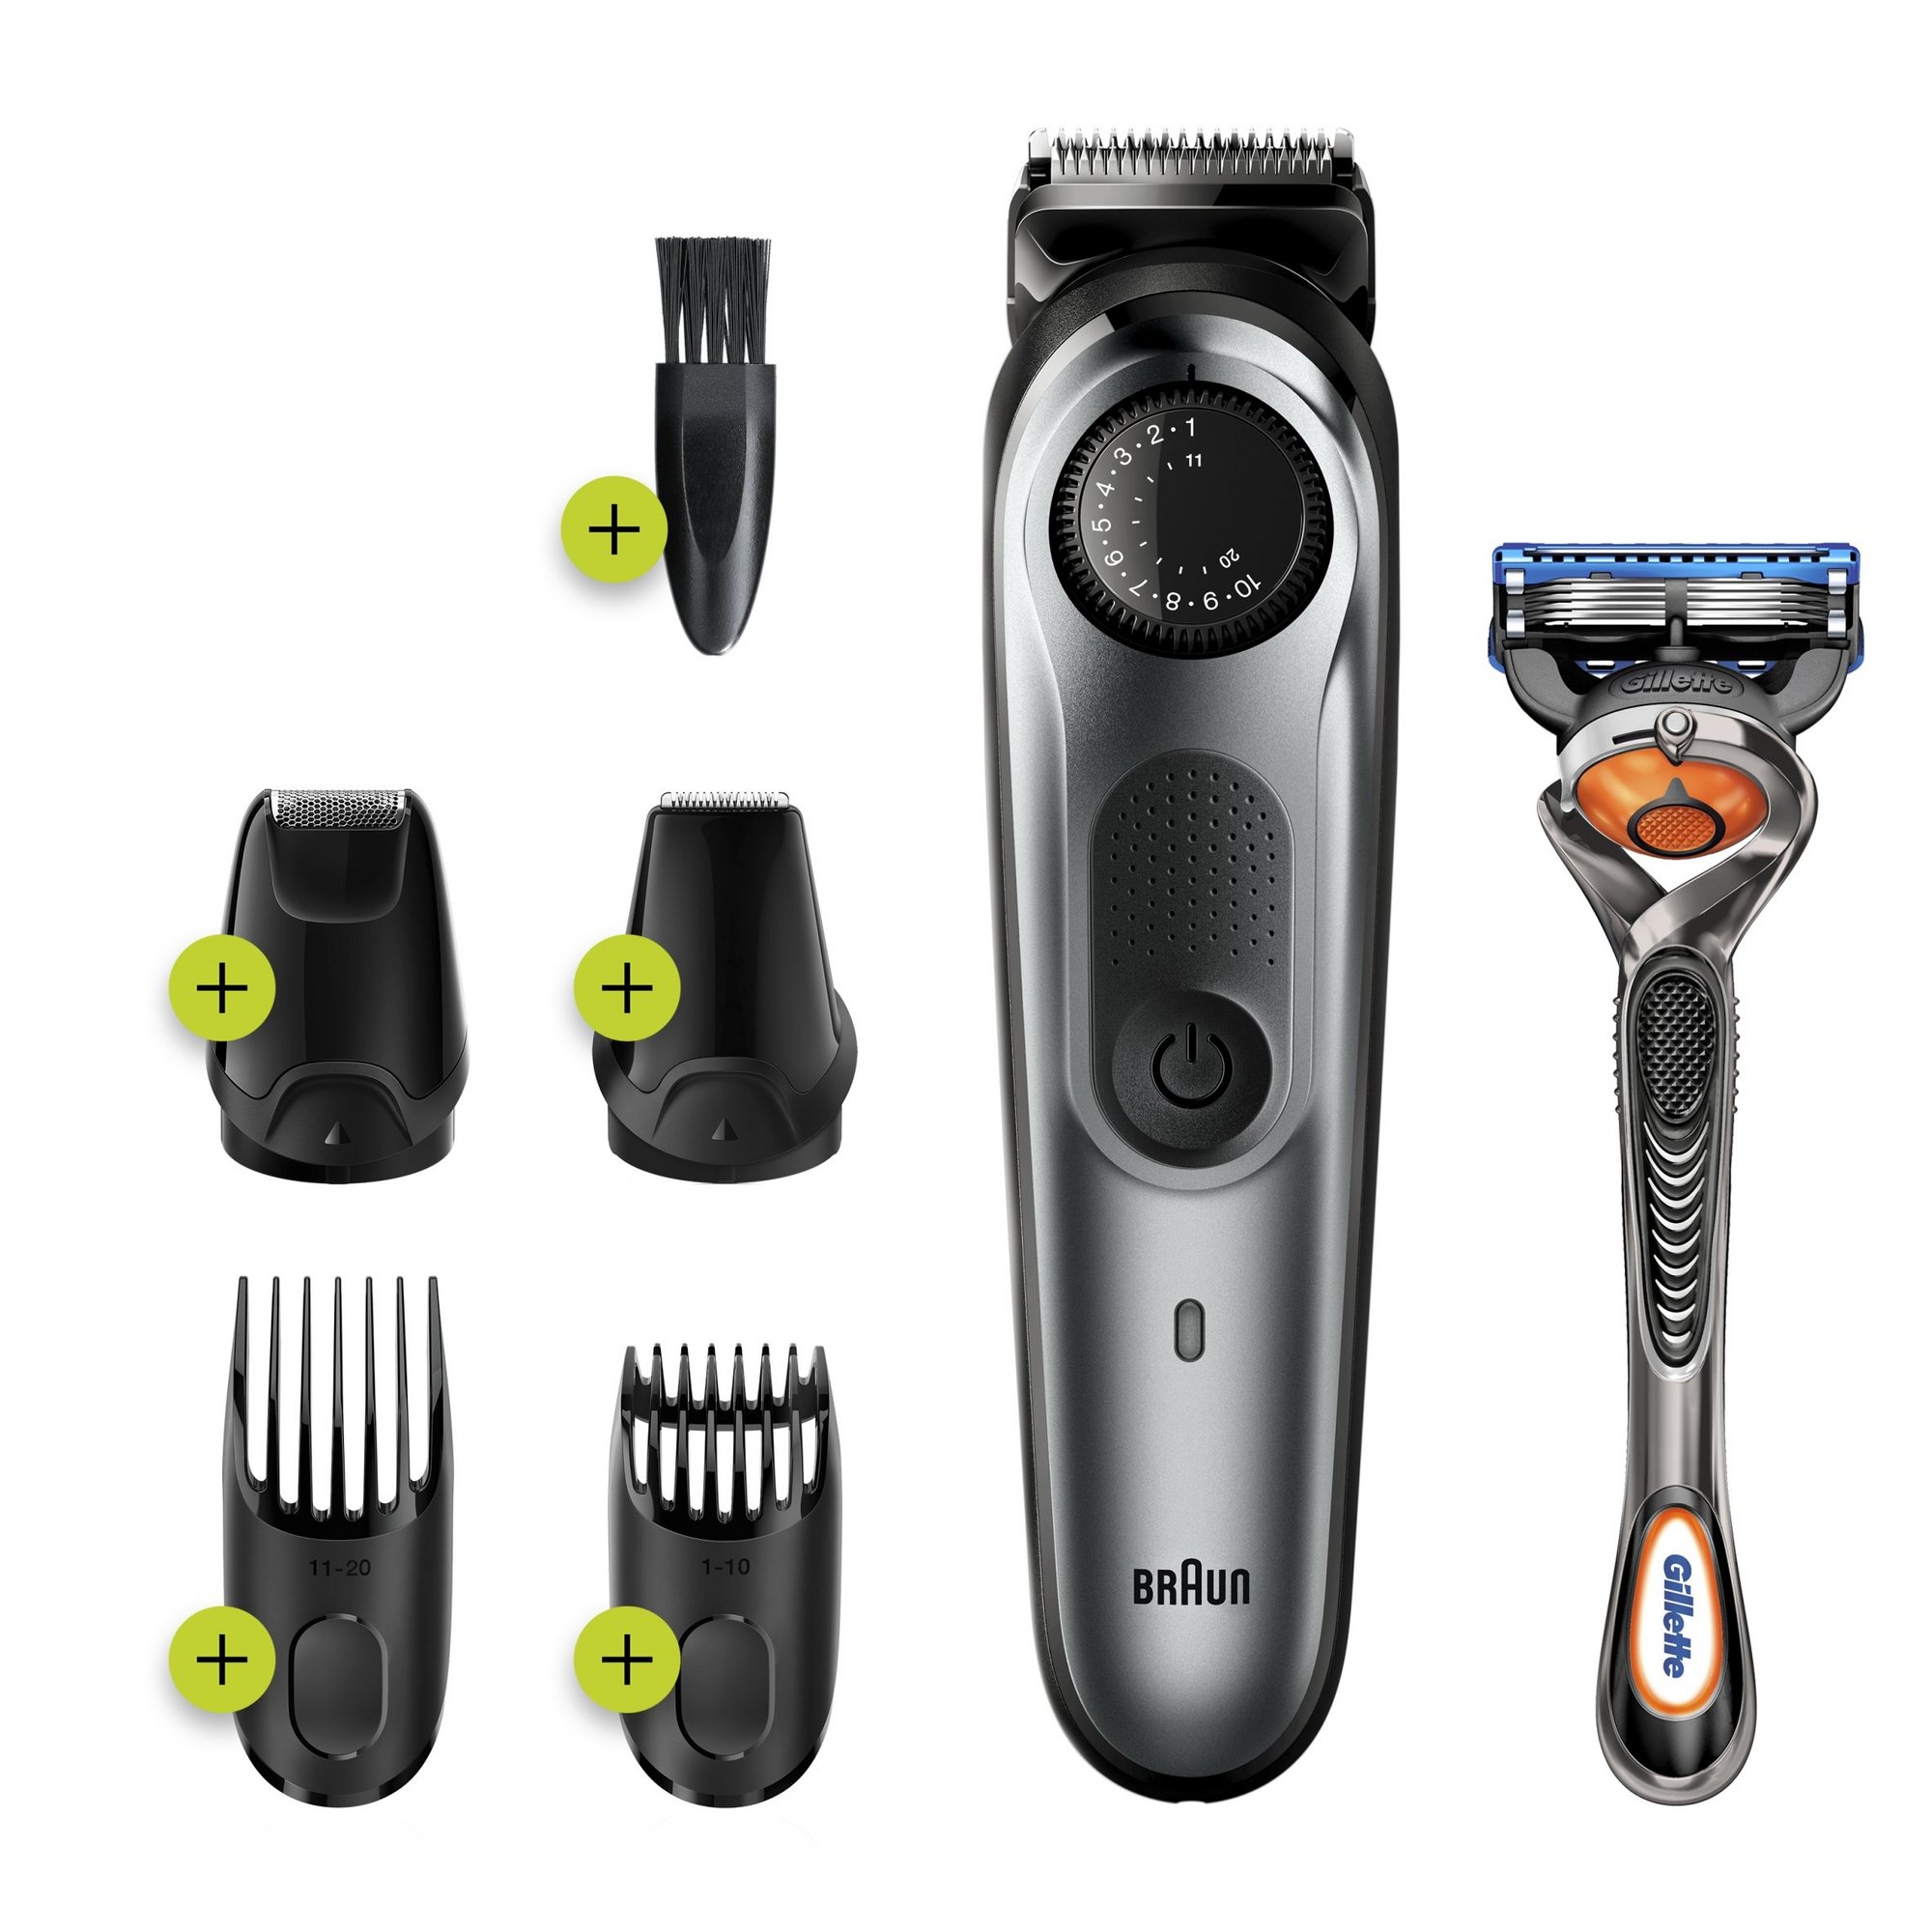 Braun Beard Trimmer and Hair Clipper with 39 Length Settings